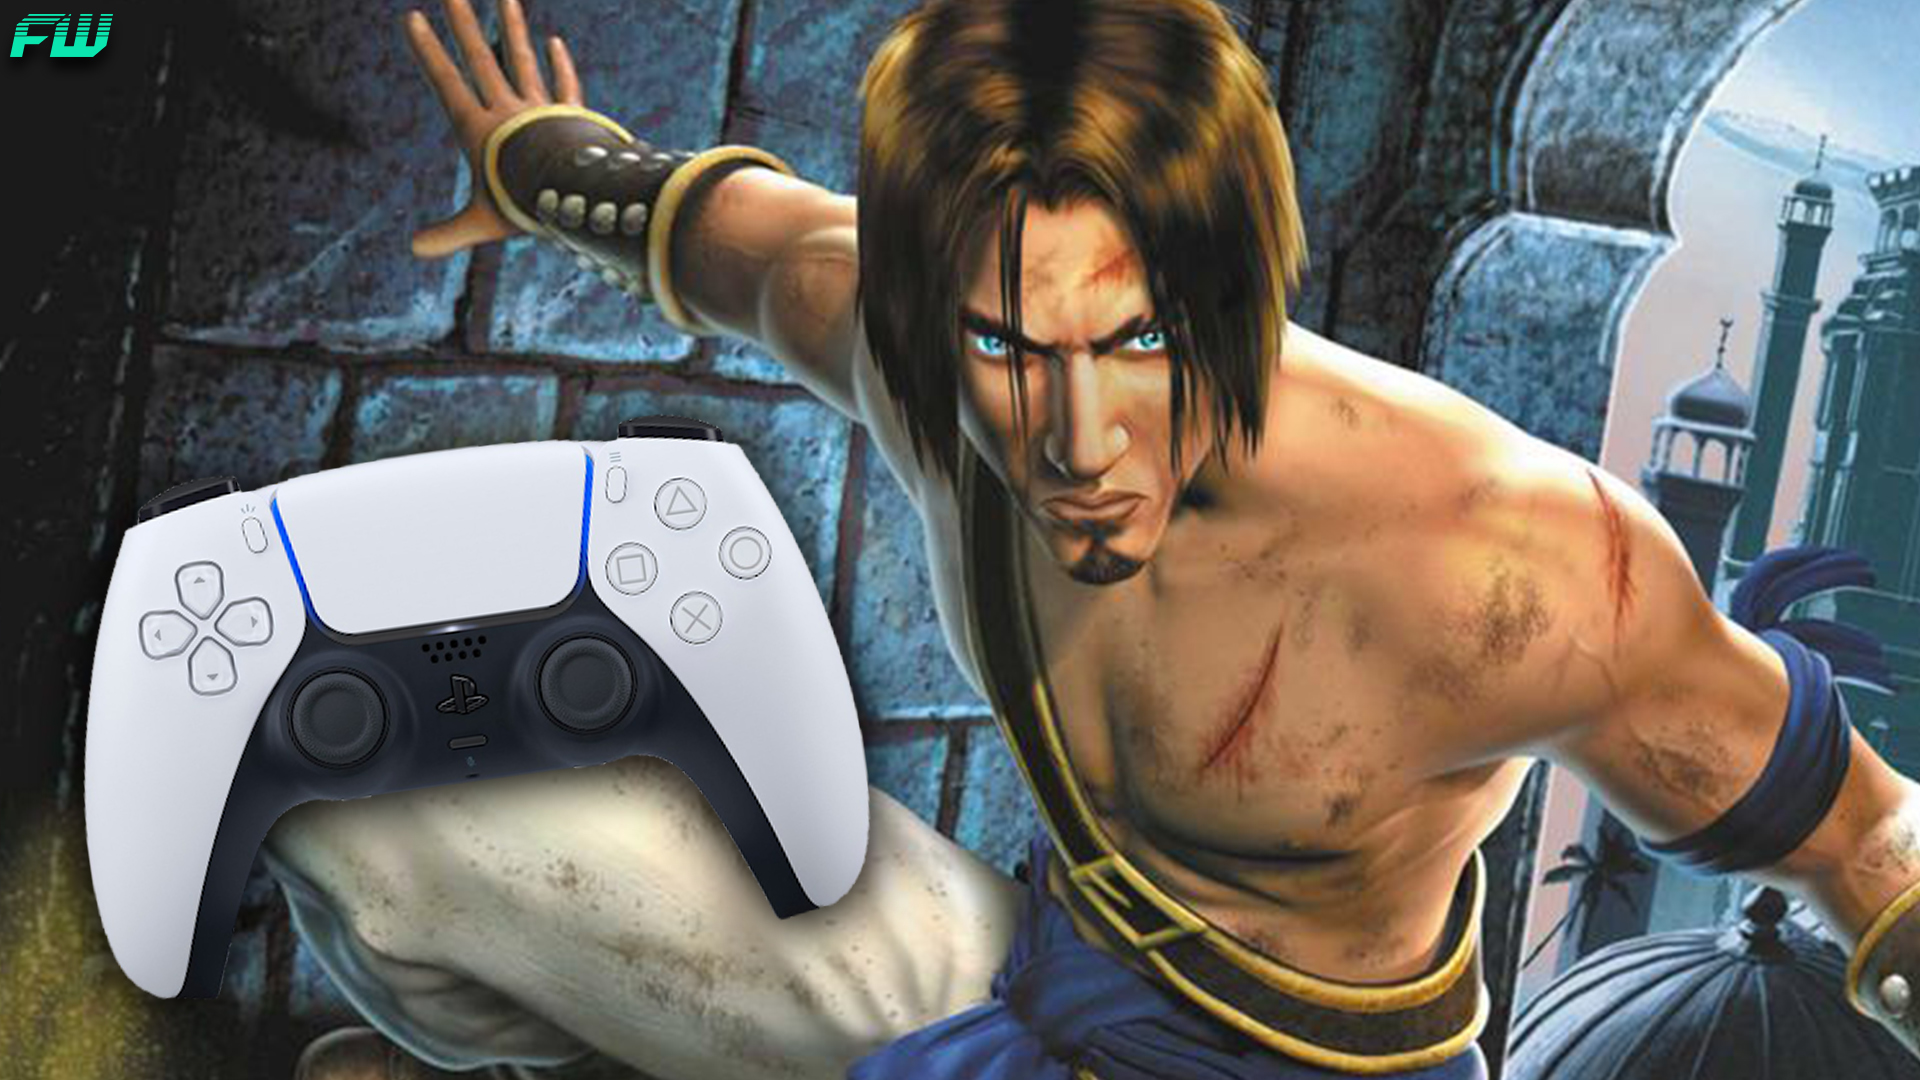 prince of persia switch